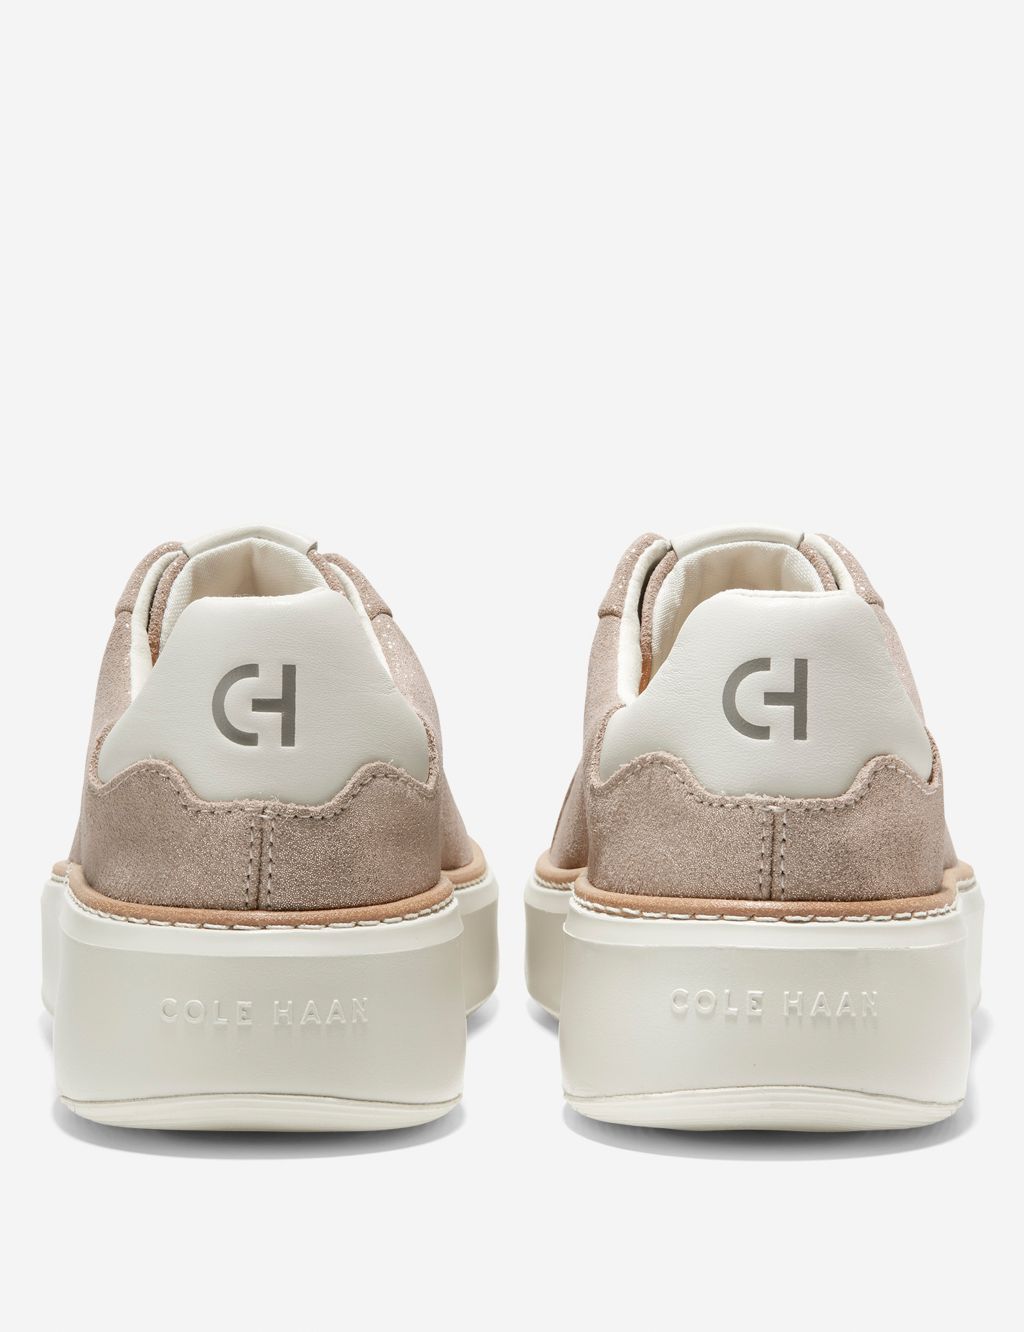 Grandpro Topspin Leather Lace Up Trainers image 3